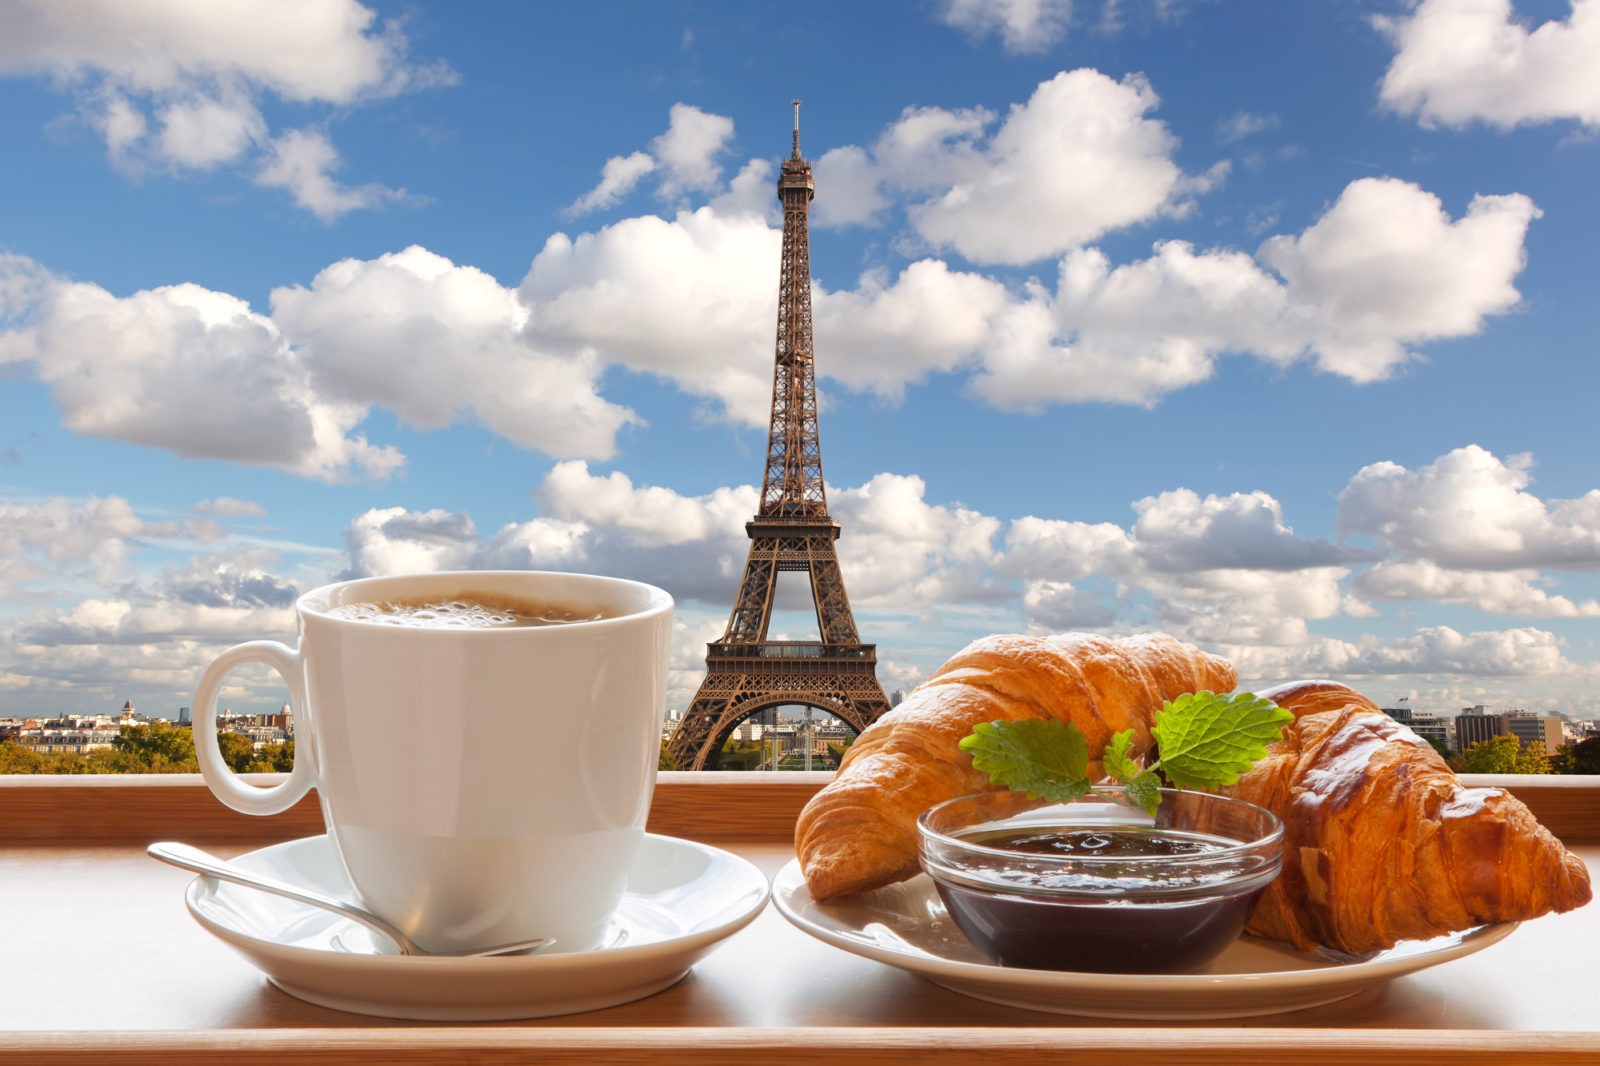 Coffee with croissants against Eiffel Tower in Paris, France / © samot